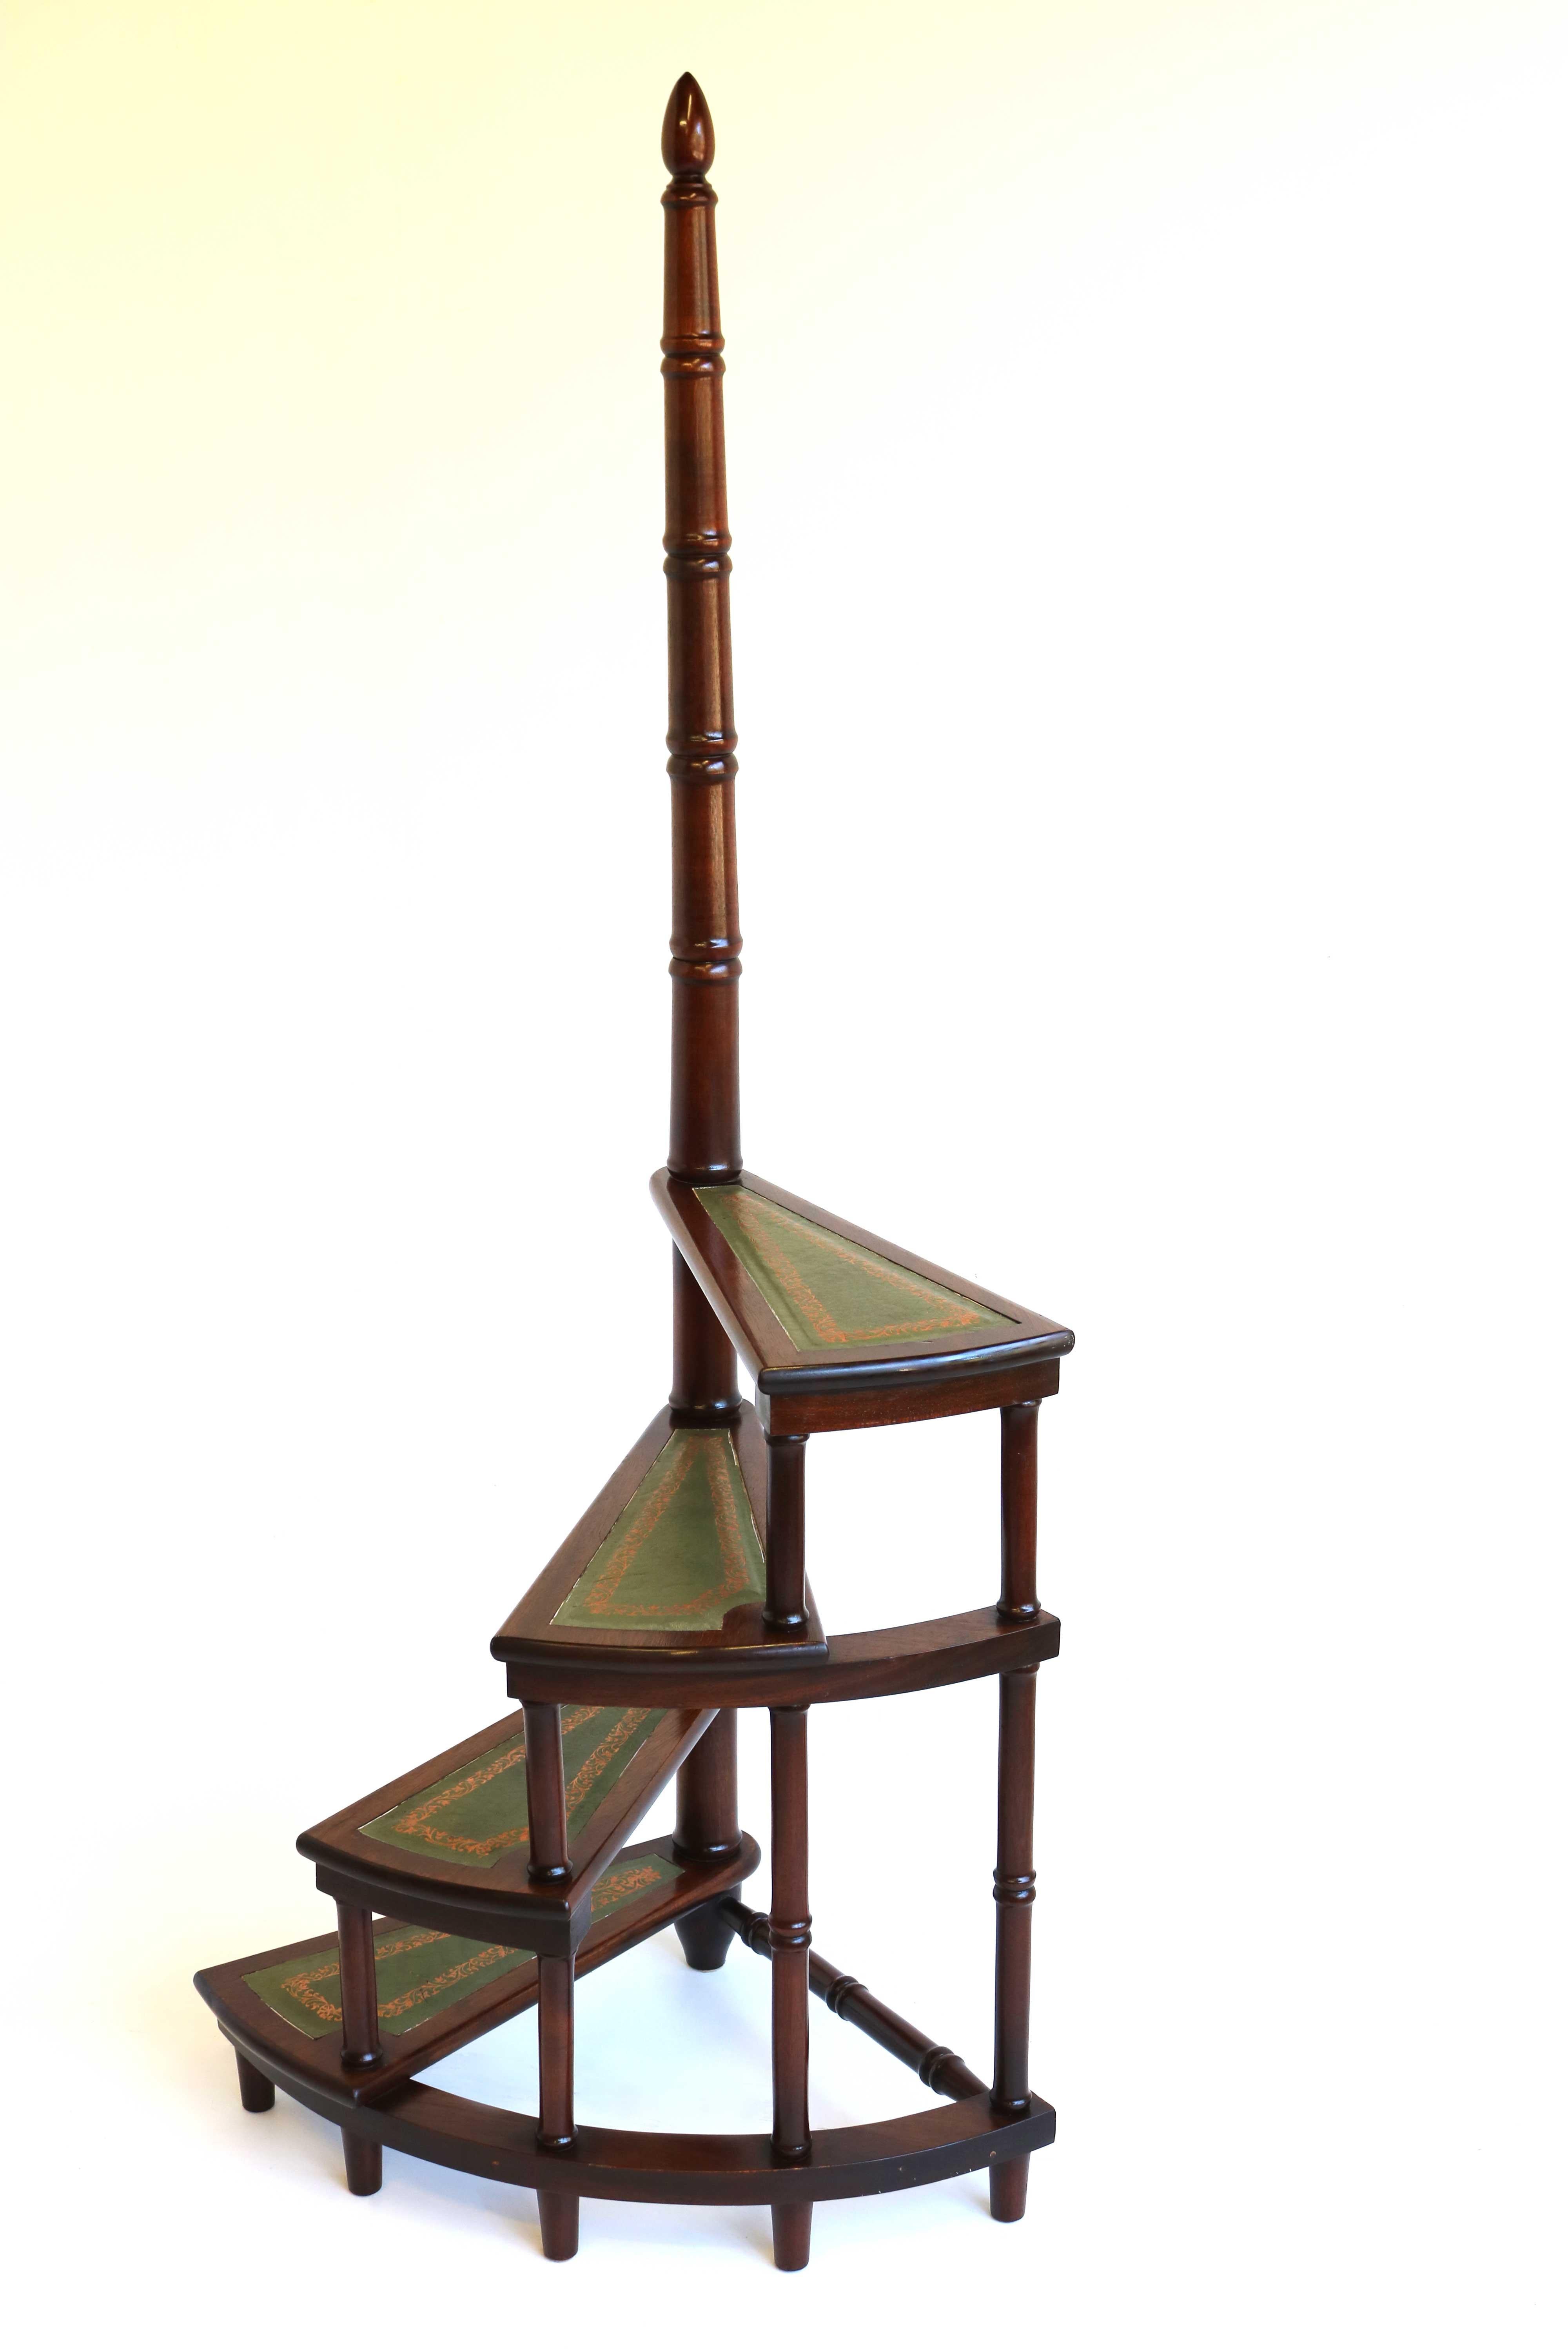 Hand-Carved Midcentury Library Stairs Carved Wooden and Leather Bookcase Ladder Spiral Steps